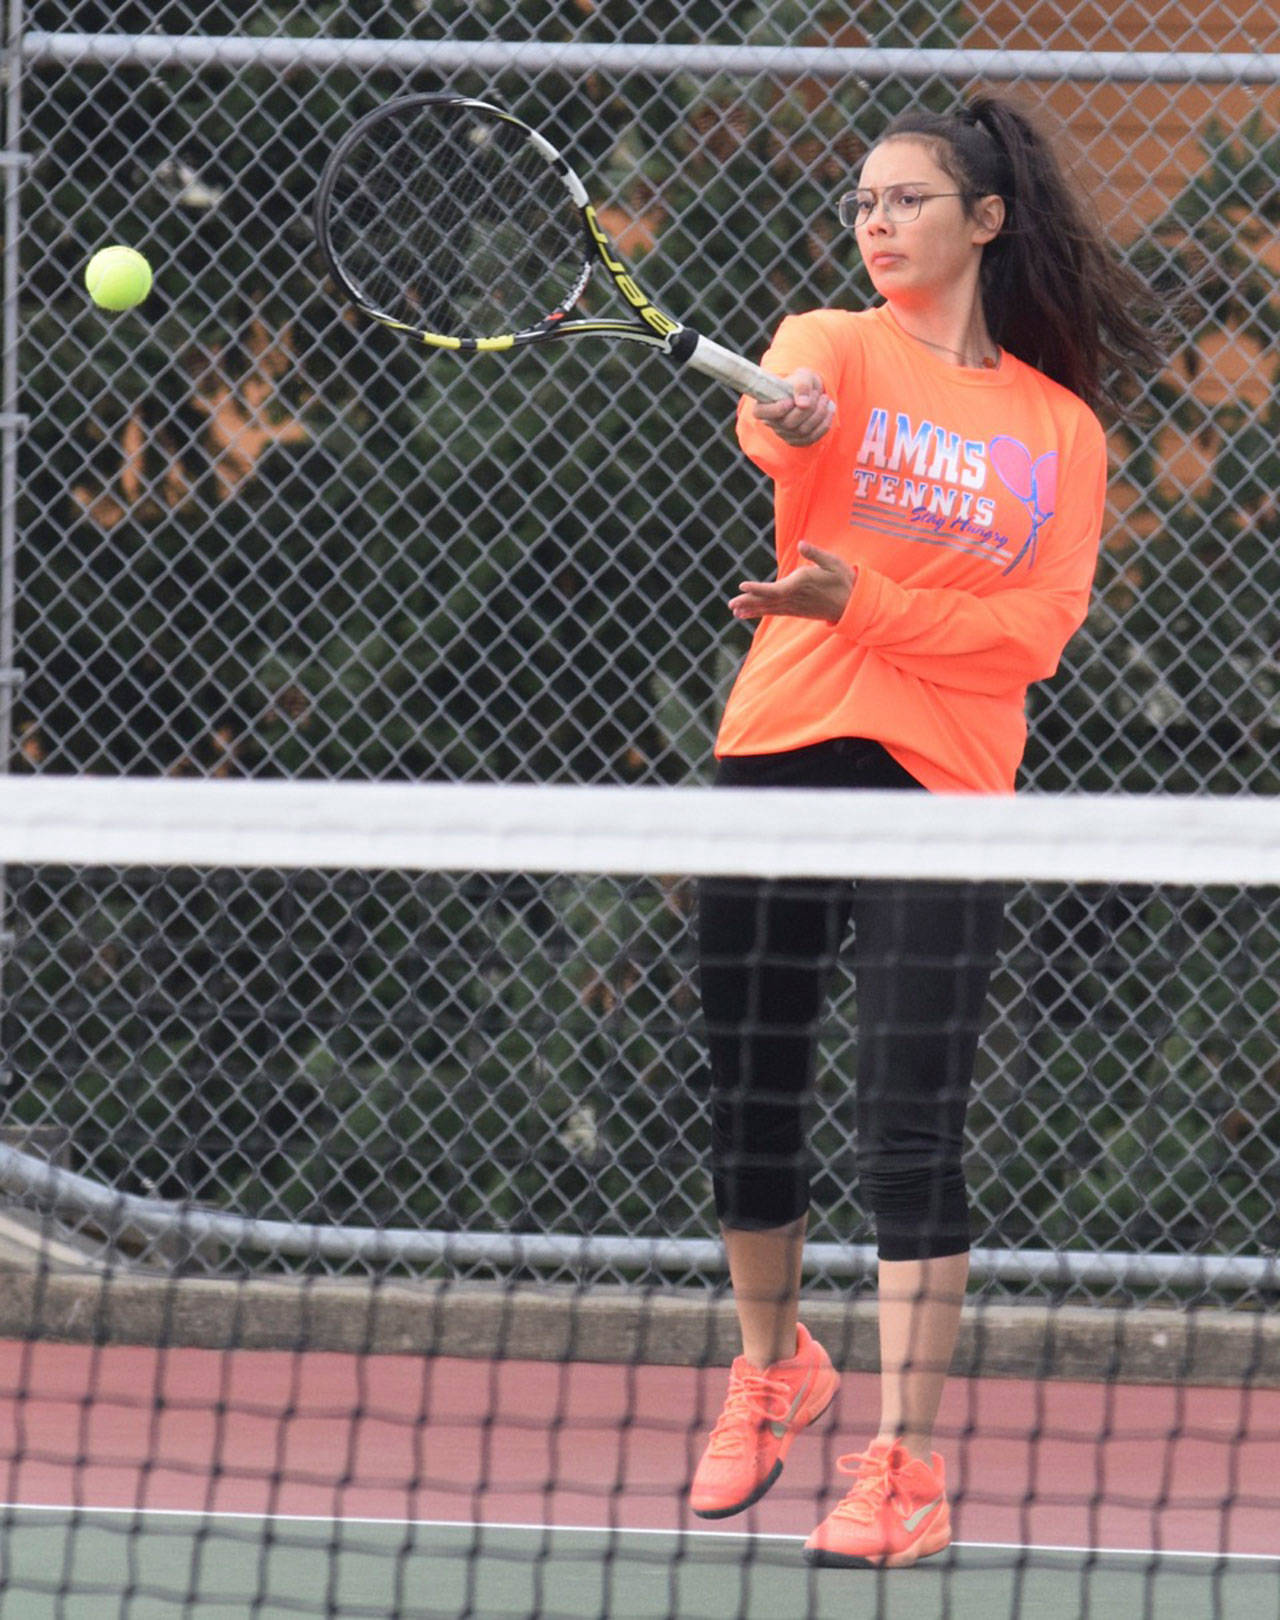 Auburn Mountainview’s top singles player Angie Andreotti returns a shot during her match victory Tuesday. RACHEL CIAMPI, Auburn Reporter